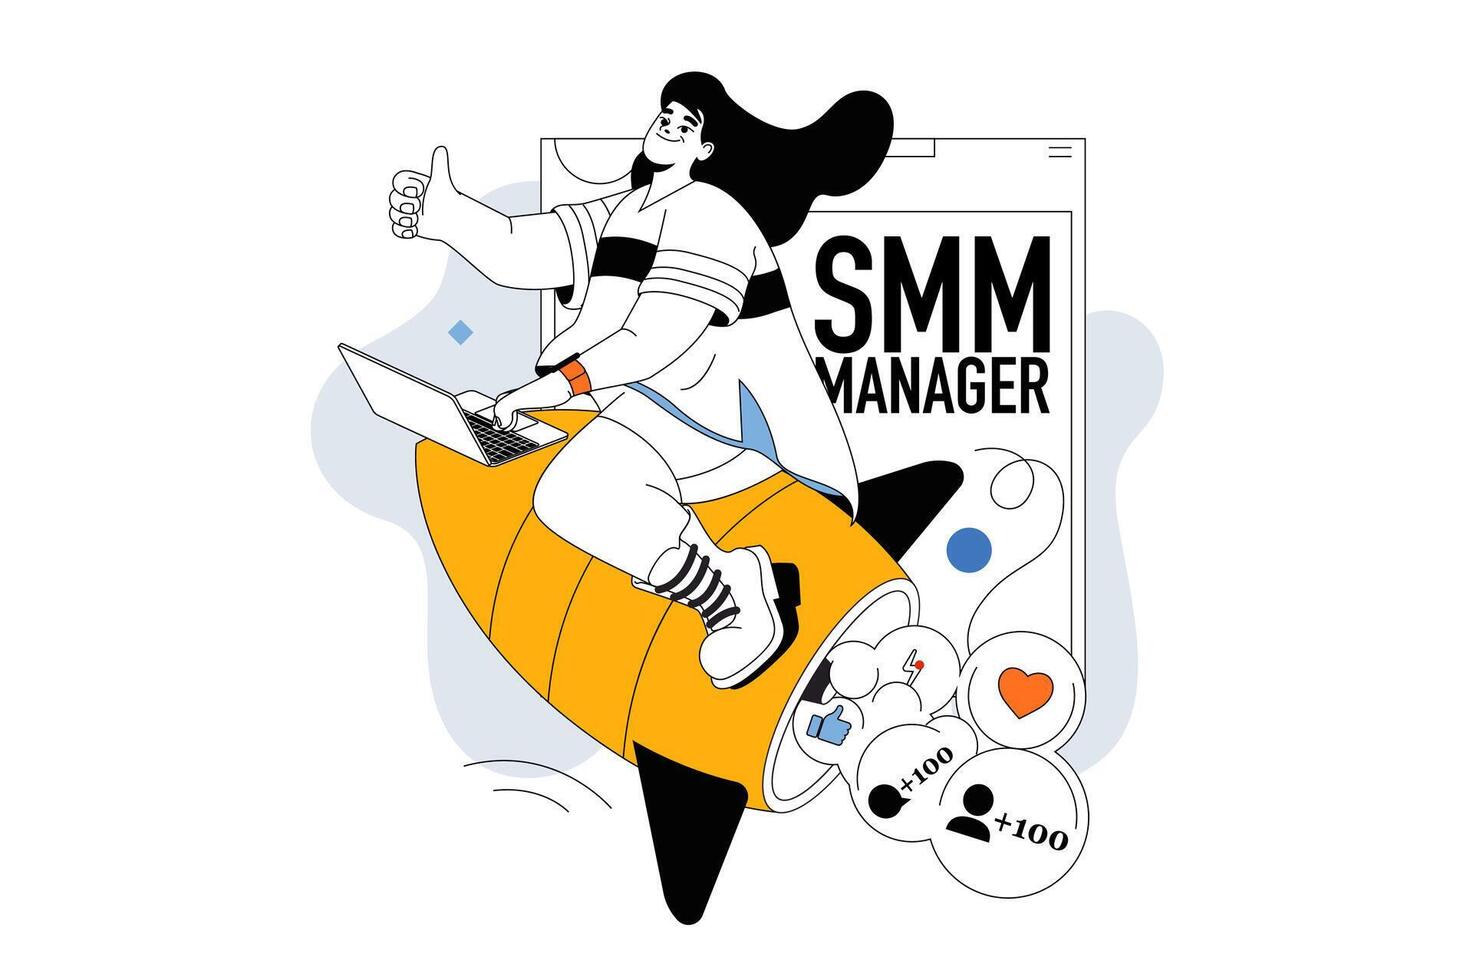 SMM manager concept with people scene in flat line design for web. Woman analyzing trends, creating digital content, promoting blogs. Vector illustration for social media banner, marketing material.